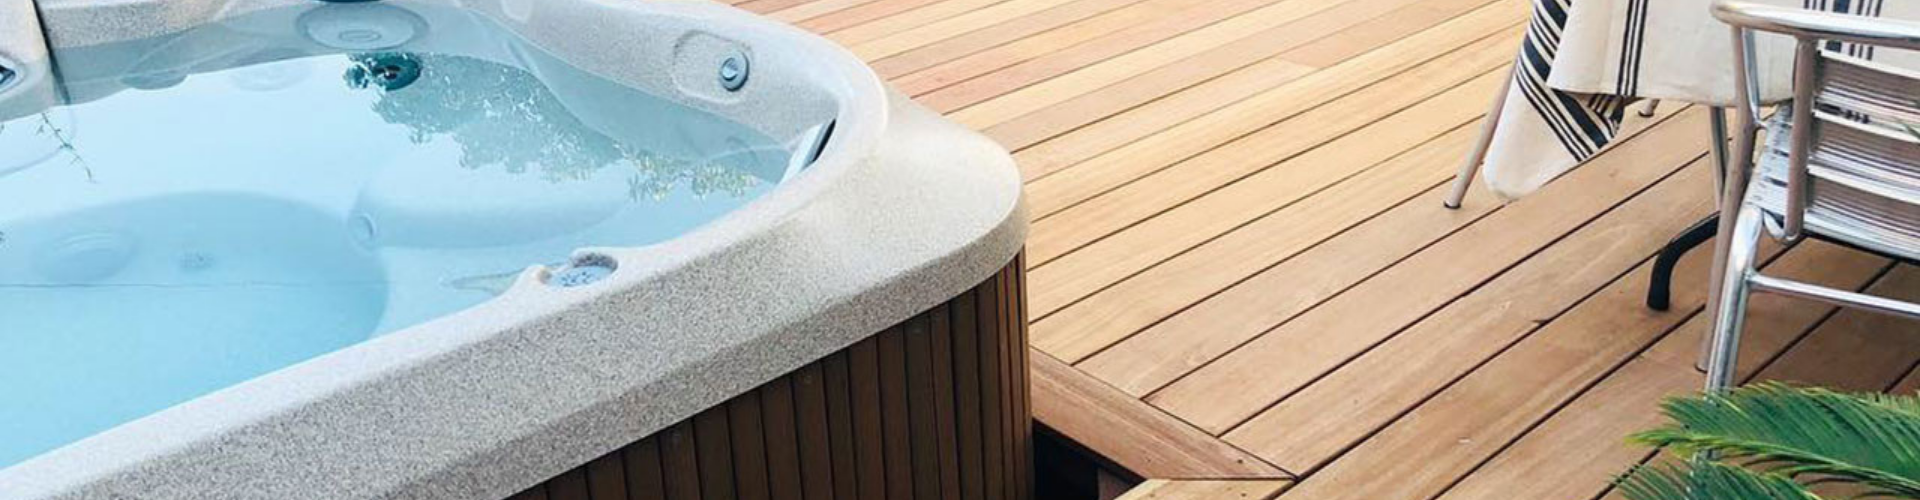 hot tub installed on a deck